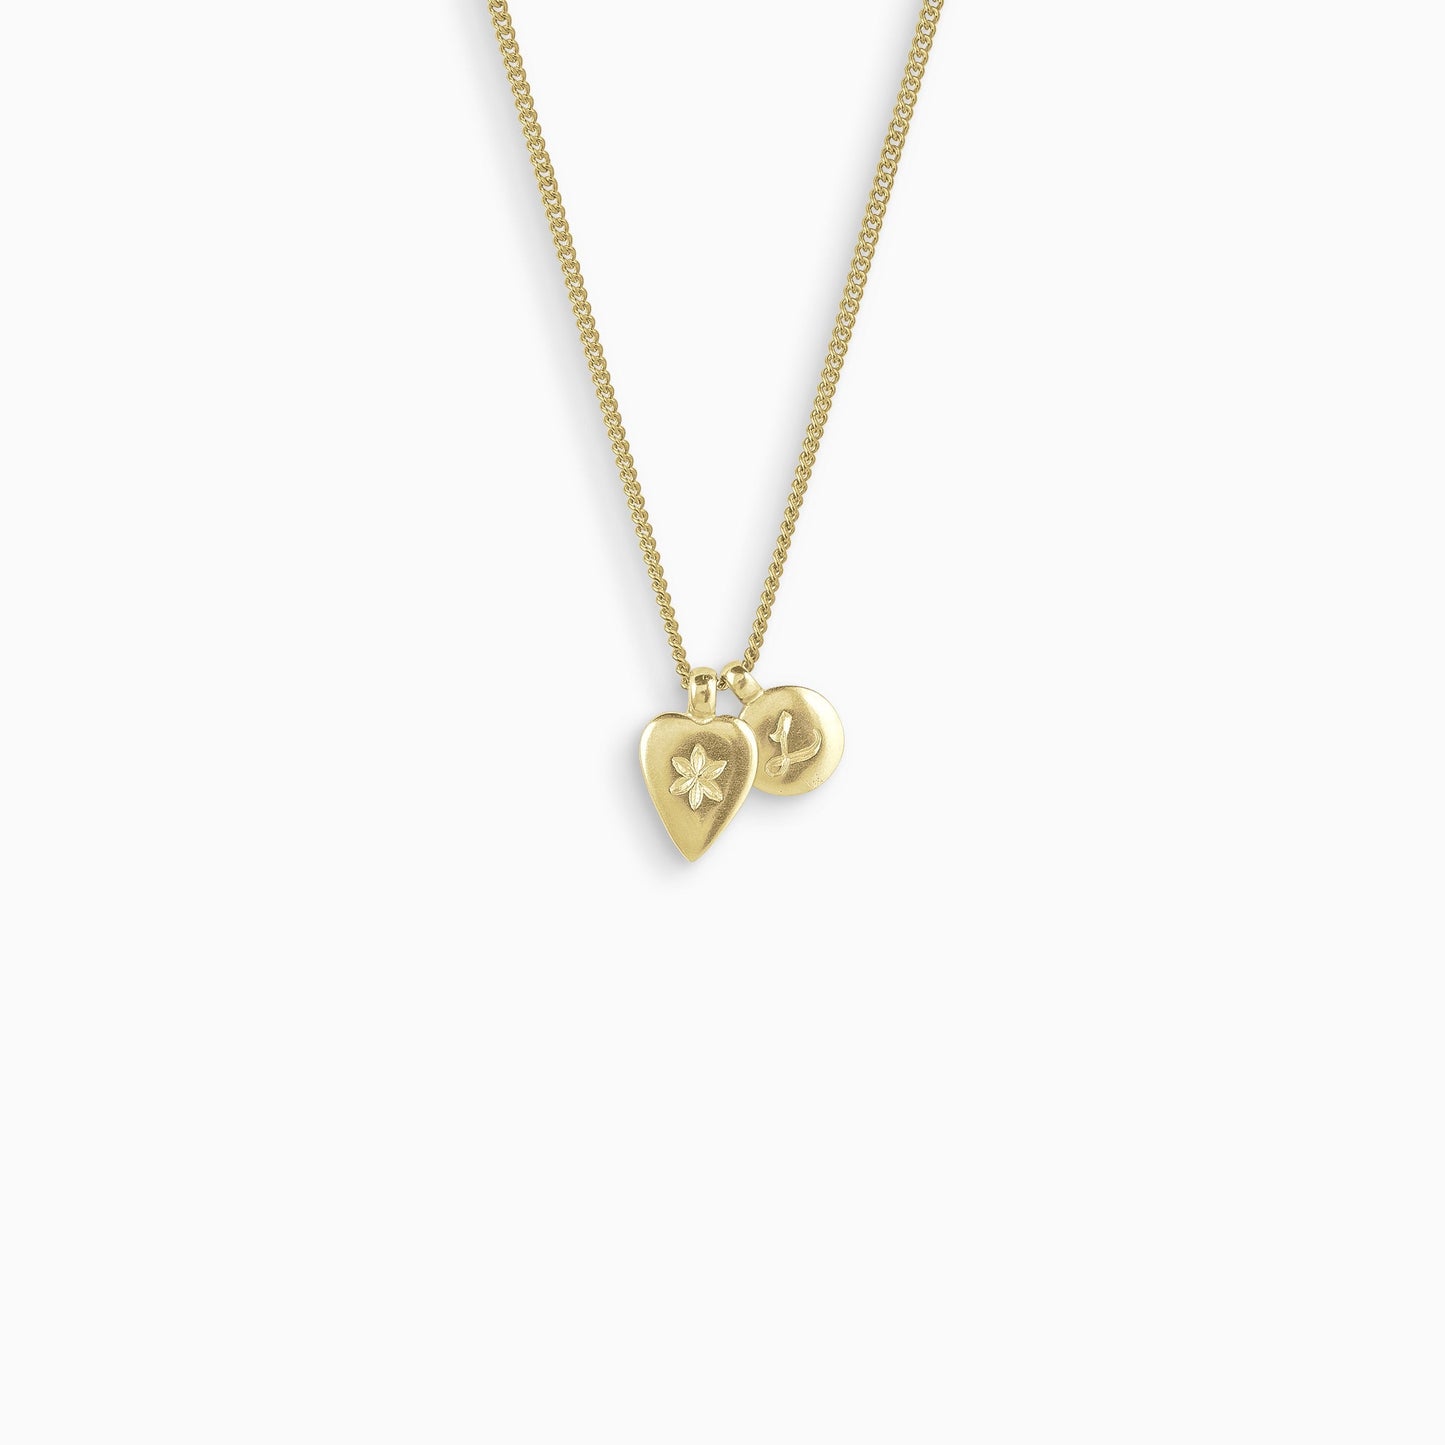 Flower Heart and Alpha charm necklace